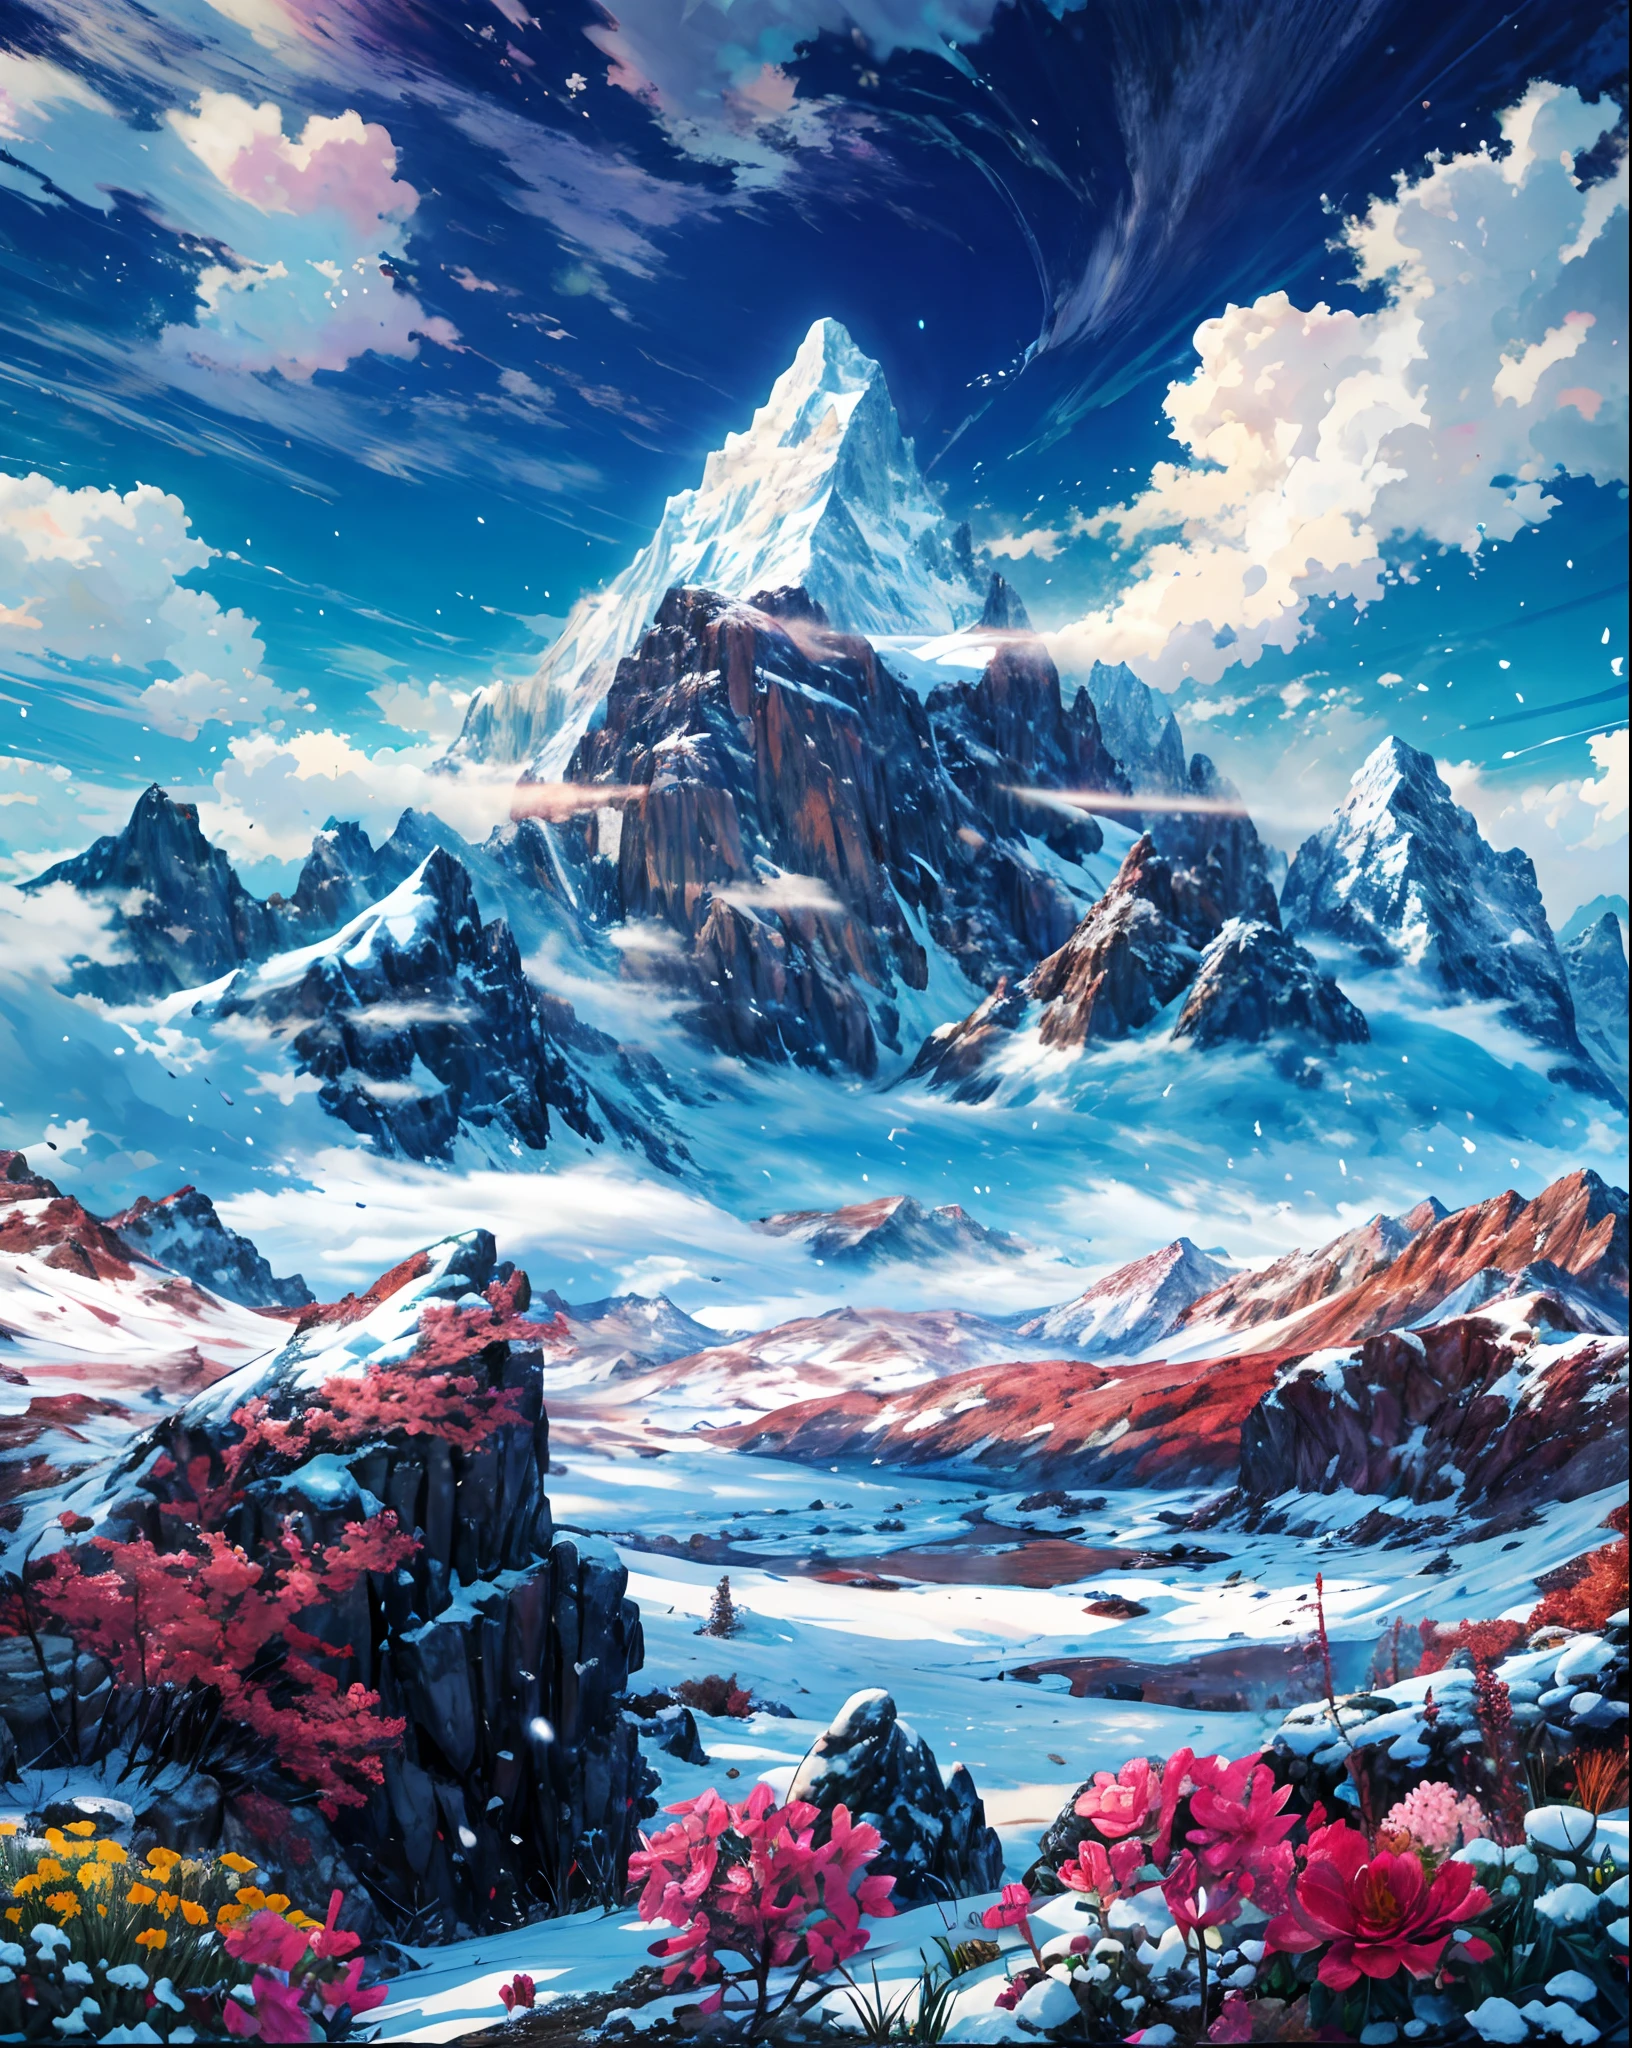 key anime visual of a beautiful, glistening lake in a forest, surrounded by  wildflowers, with mountains in the background and cumulus clouds, littering  the sky, during sunrise, modern anime style” : r/StableDiffusion